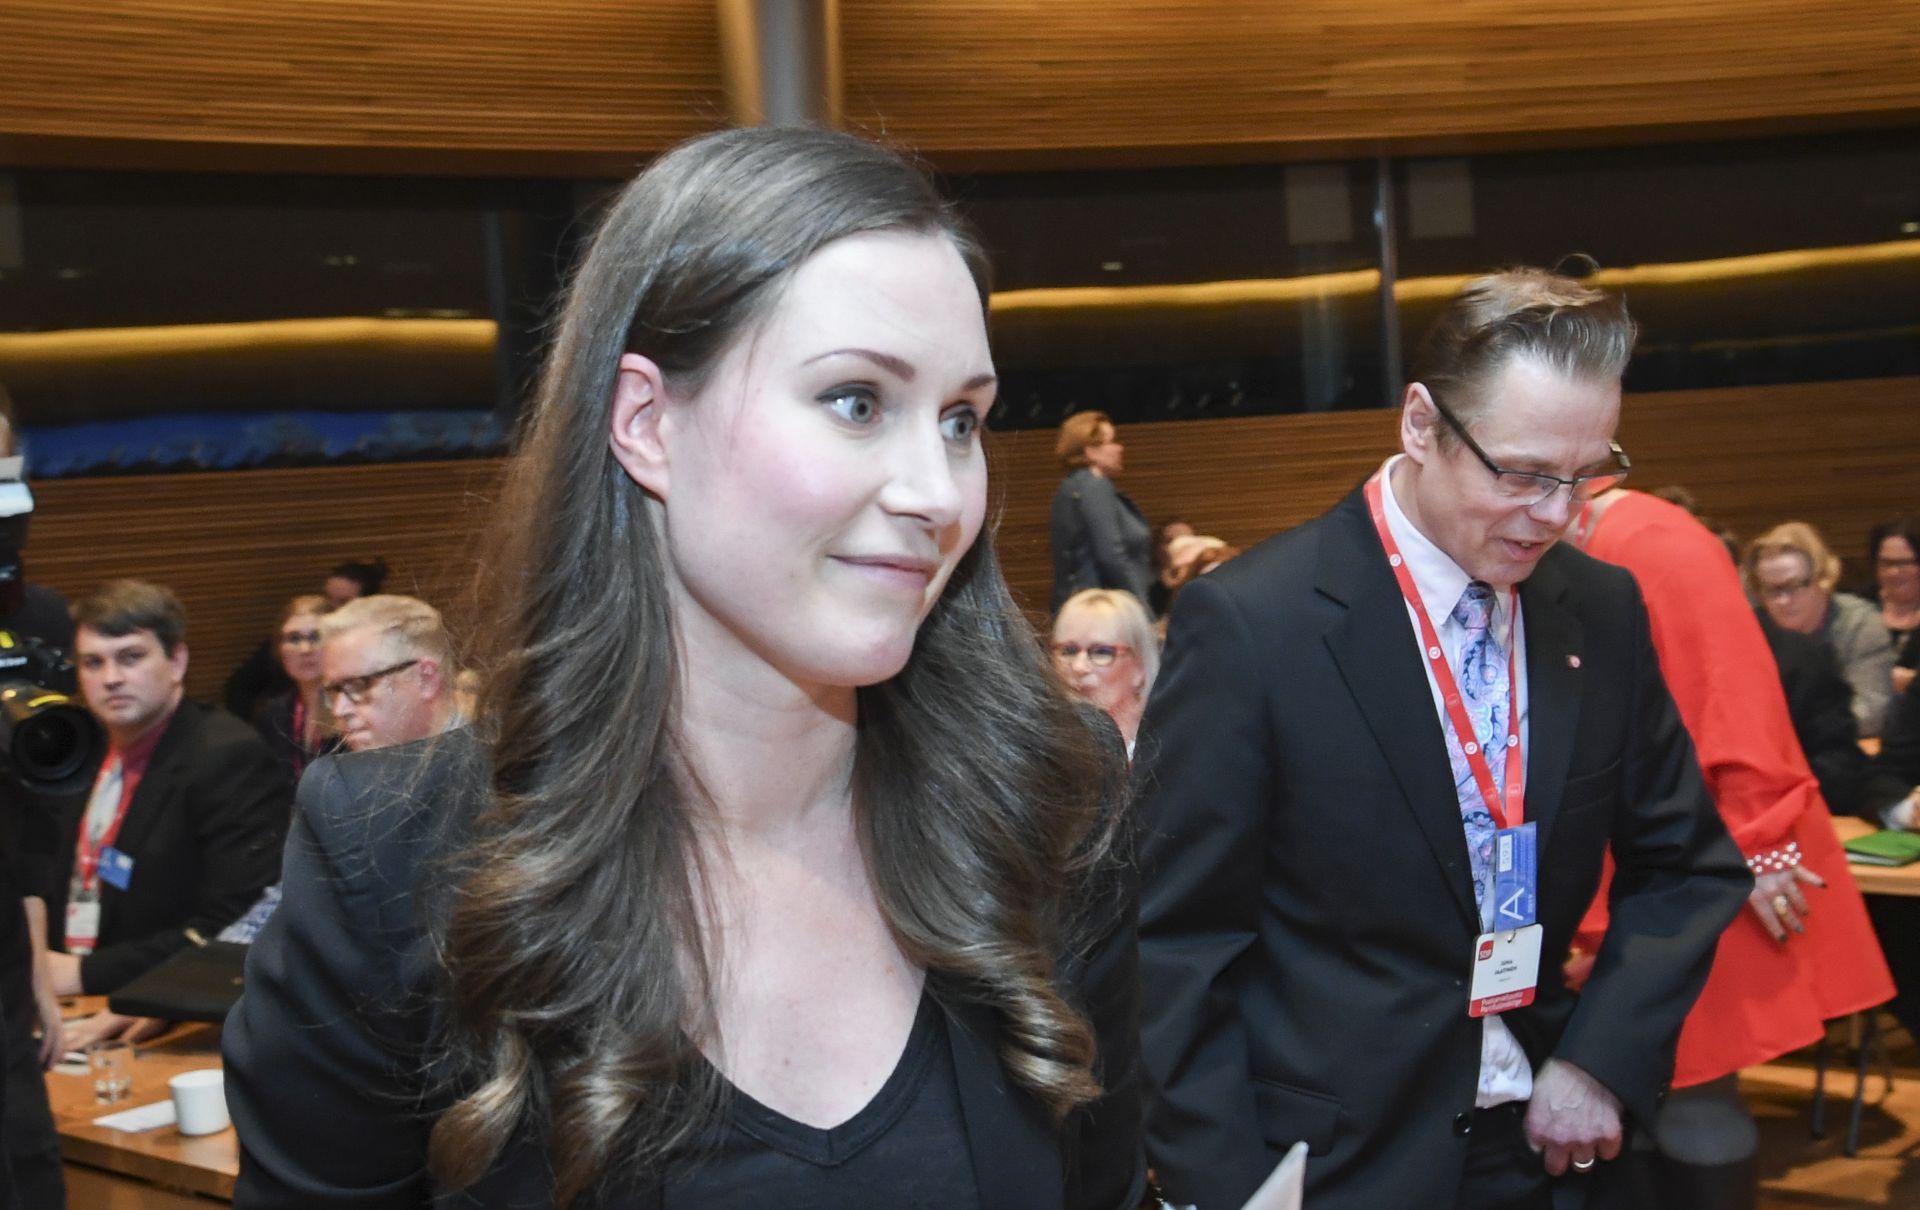 epa08056672 Social Democratic Party of Finland (SDP) deputy leader Sanna Marin attends a SDP party event in Helsinki, Finland, 08 December 2019 (issued 09 December 2019), where she was elected to the post of prime minister. Marin, who has been a member of the Finnish Parliament since 2015 and the country's Transport Minister since June 2019, is to become the world's youngest prime minister at the age of 34.  EPA/KIMMO BRANDT